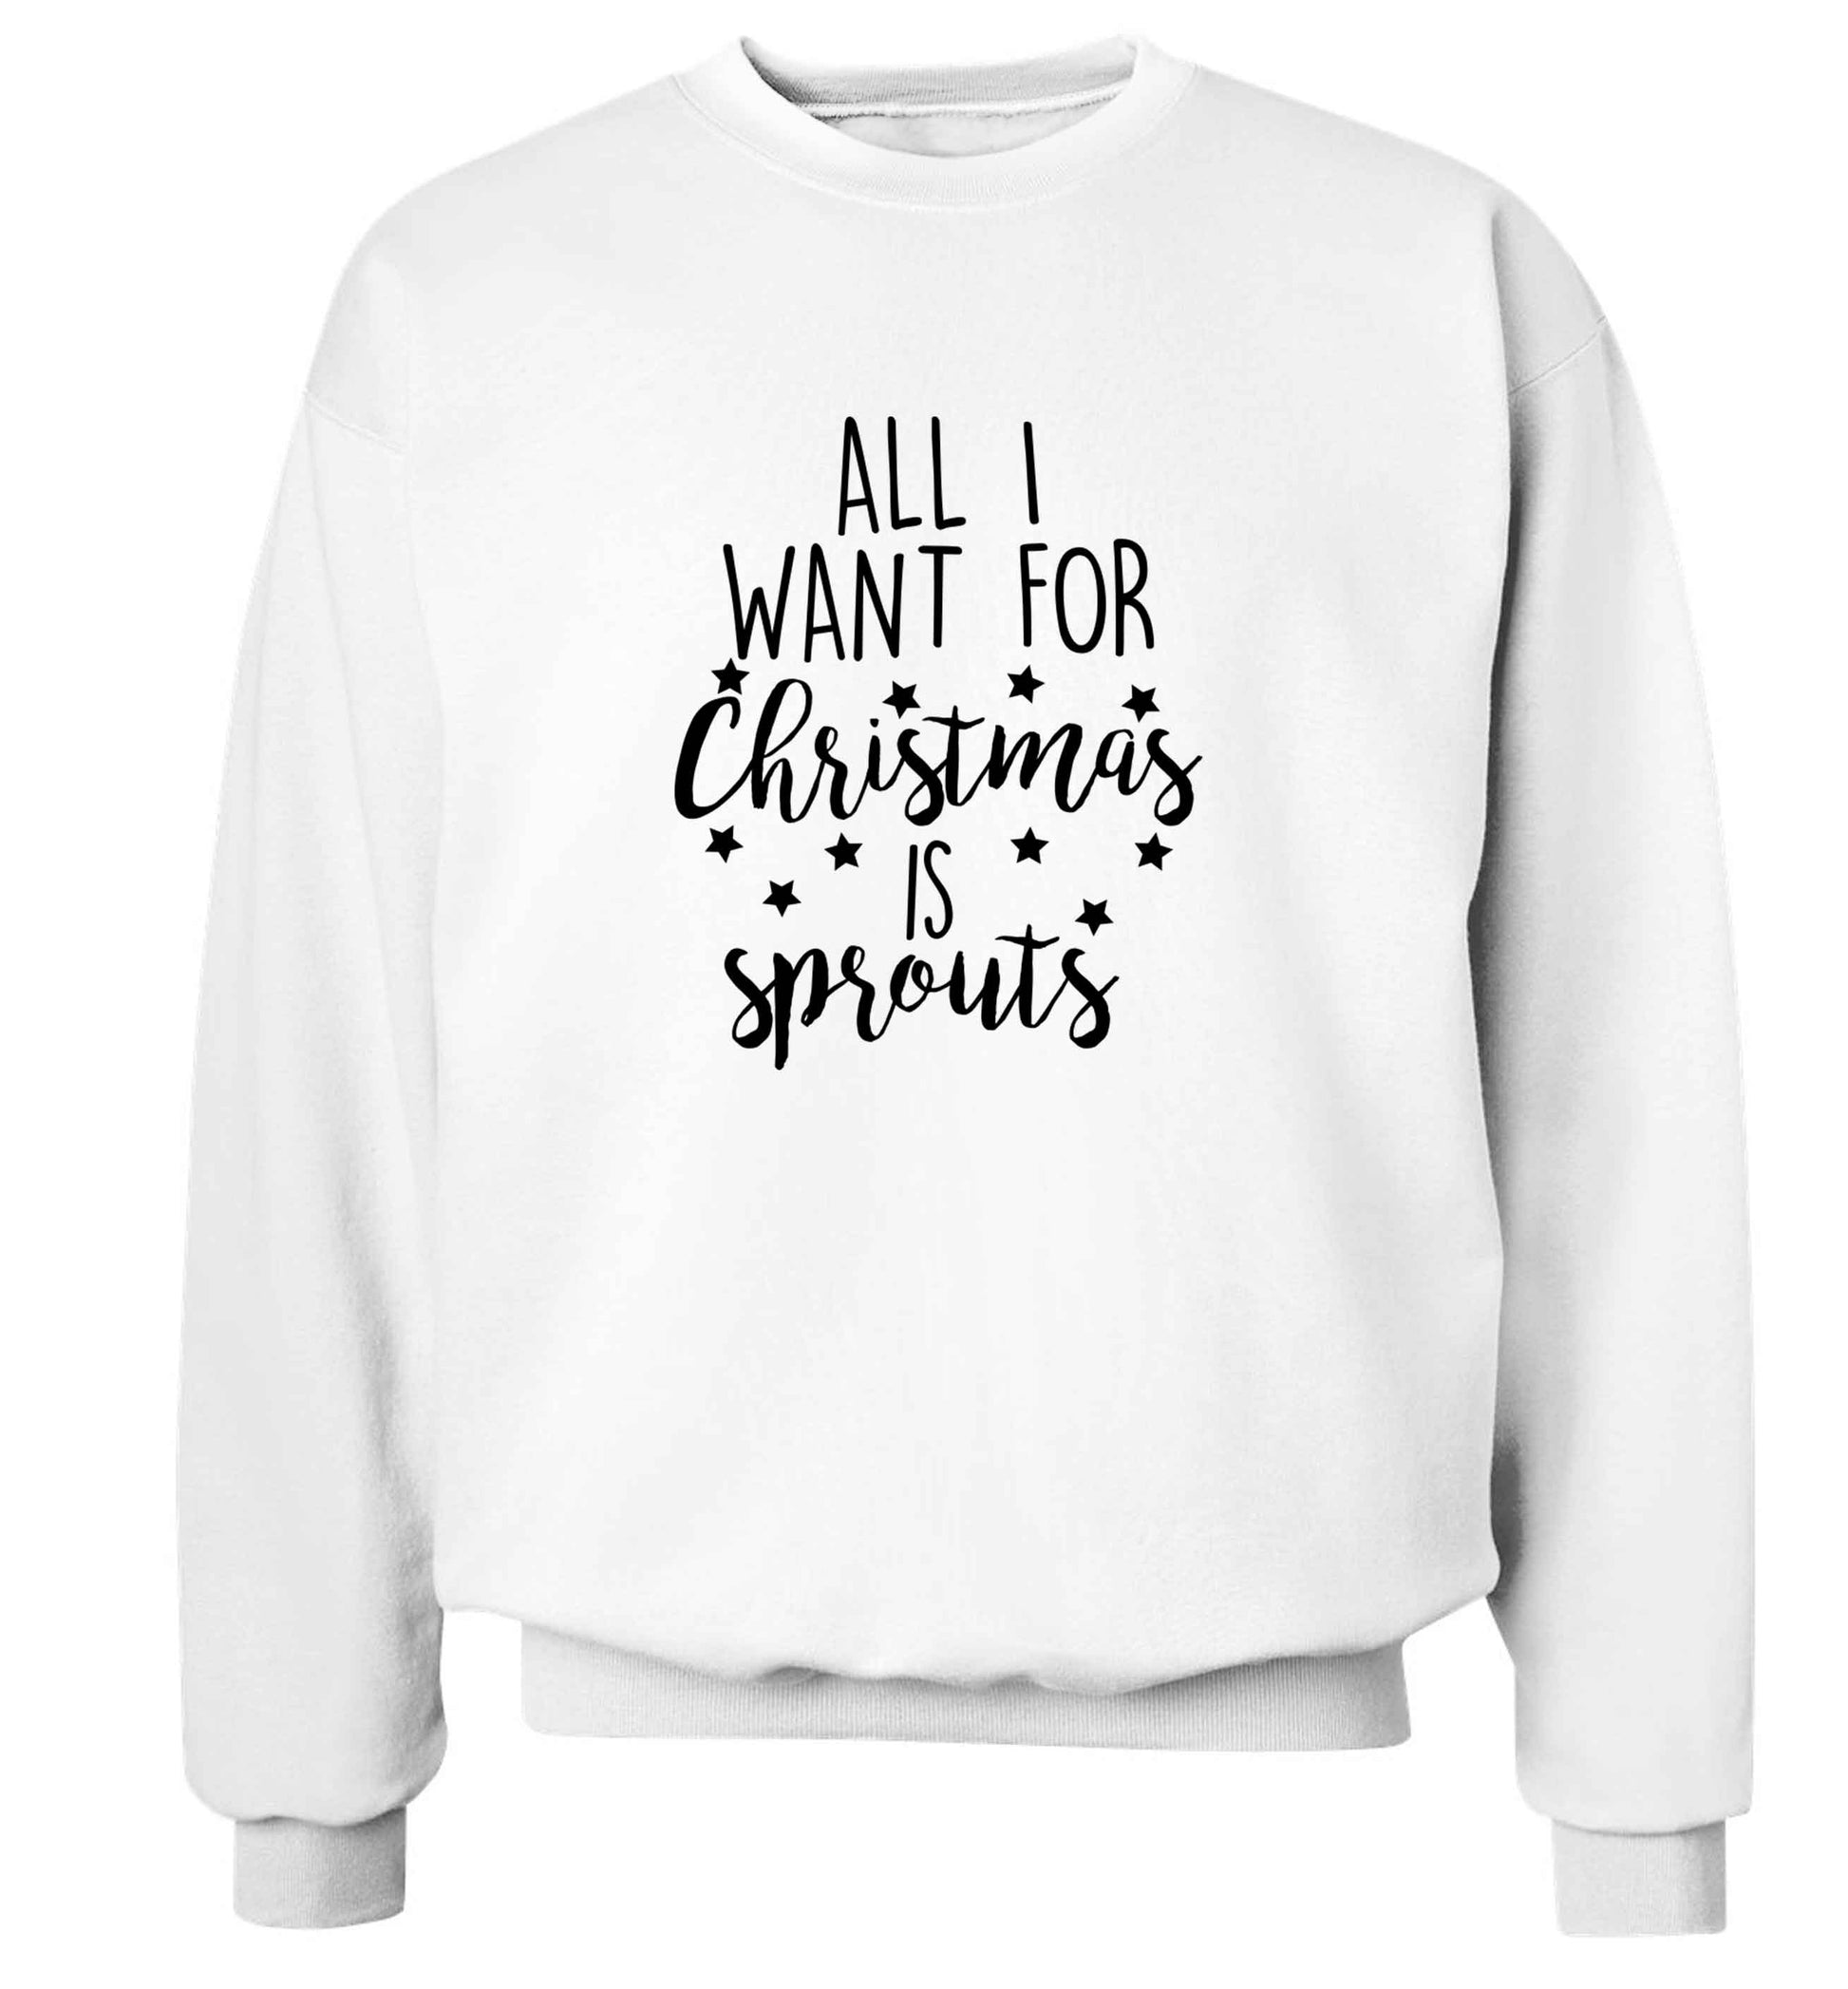 All I want for Christmas is sprouts adult's unisex white sweater 2XL